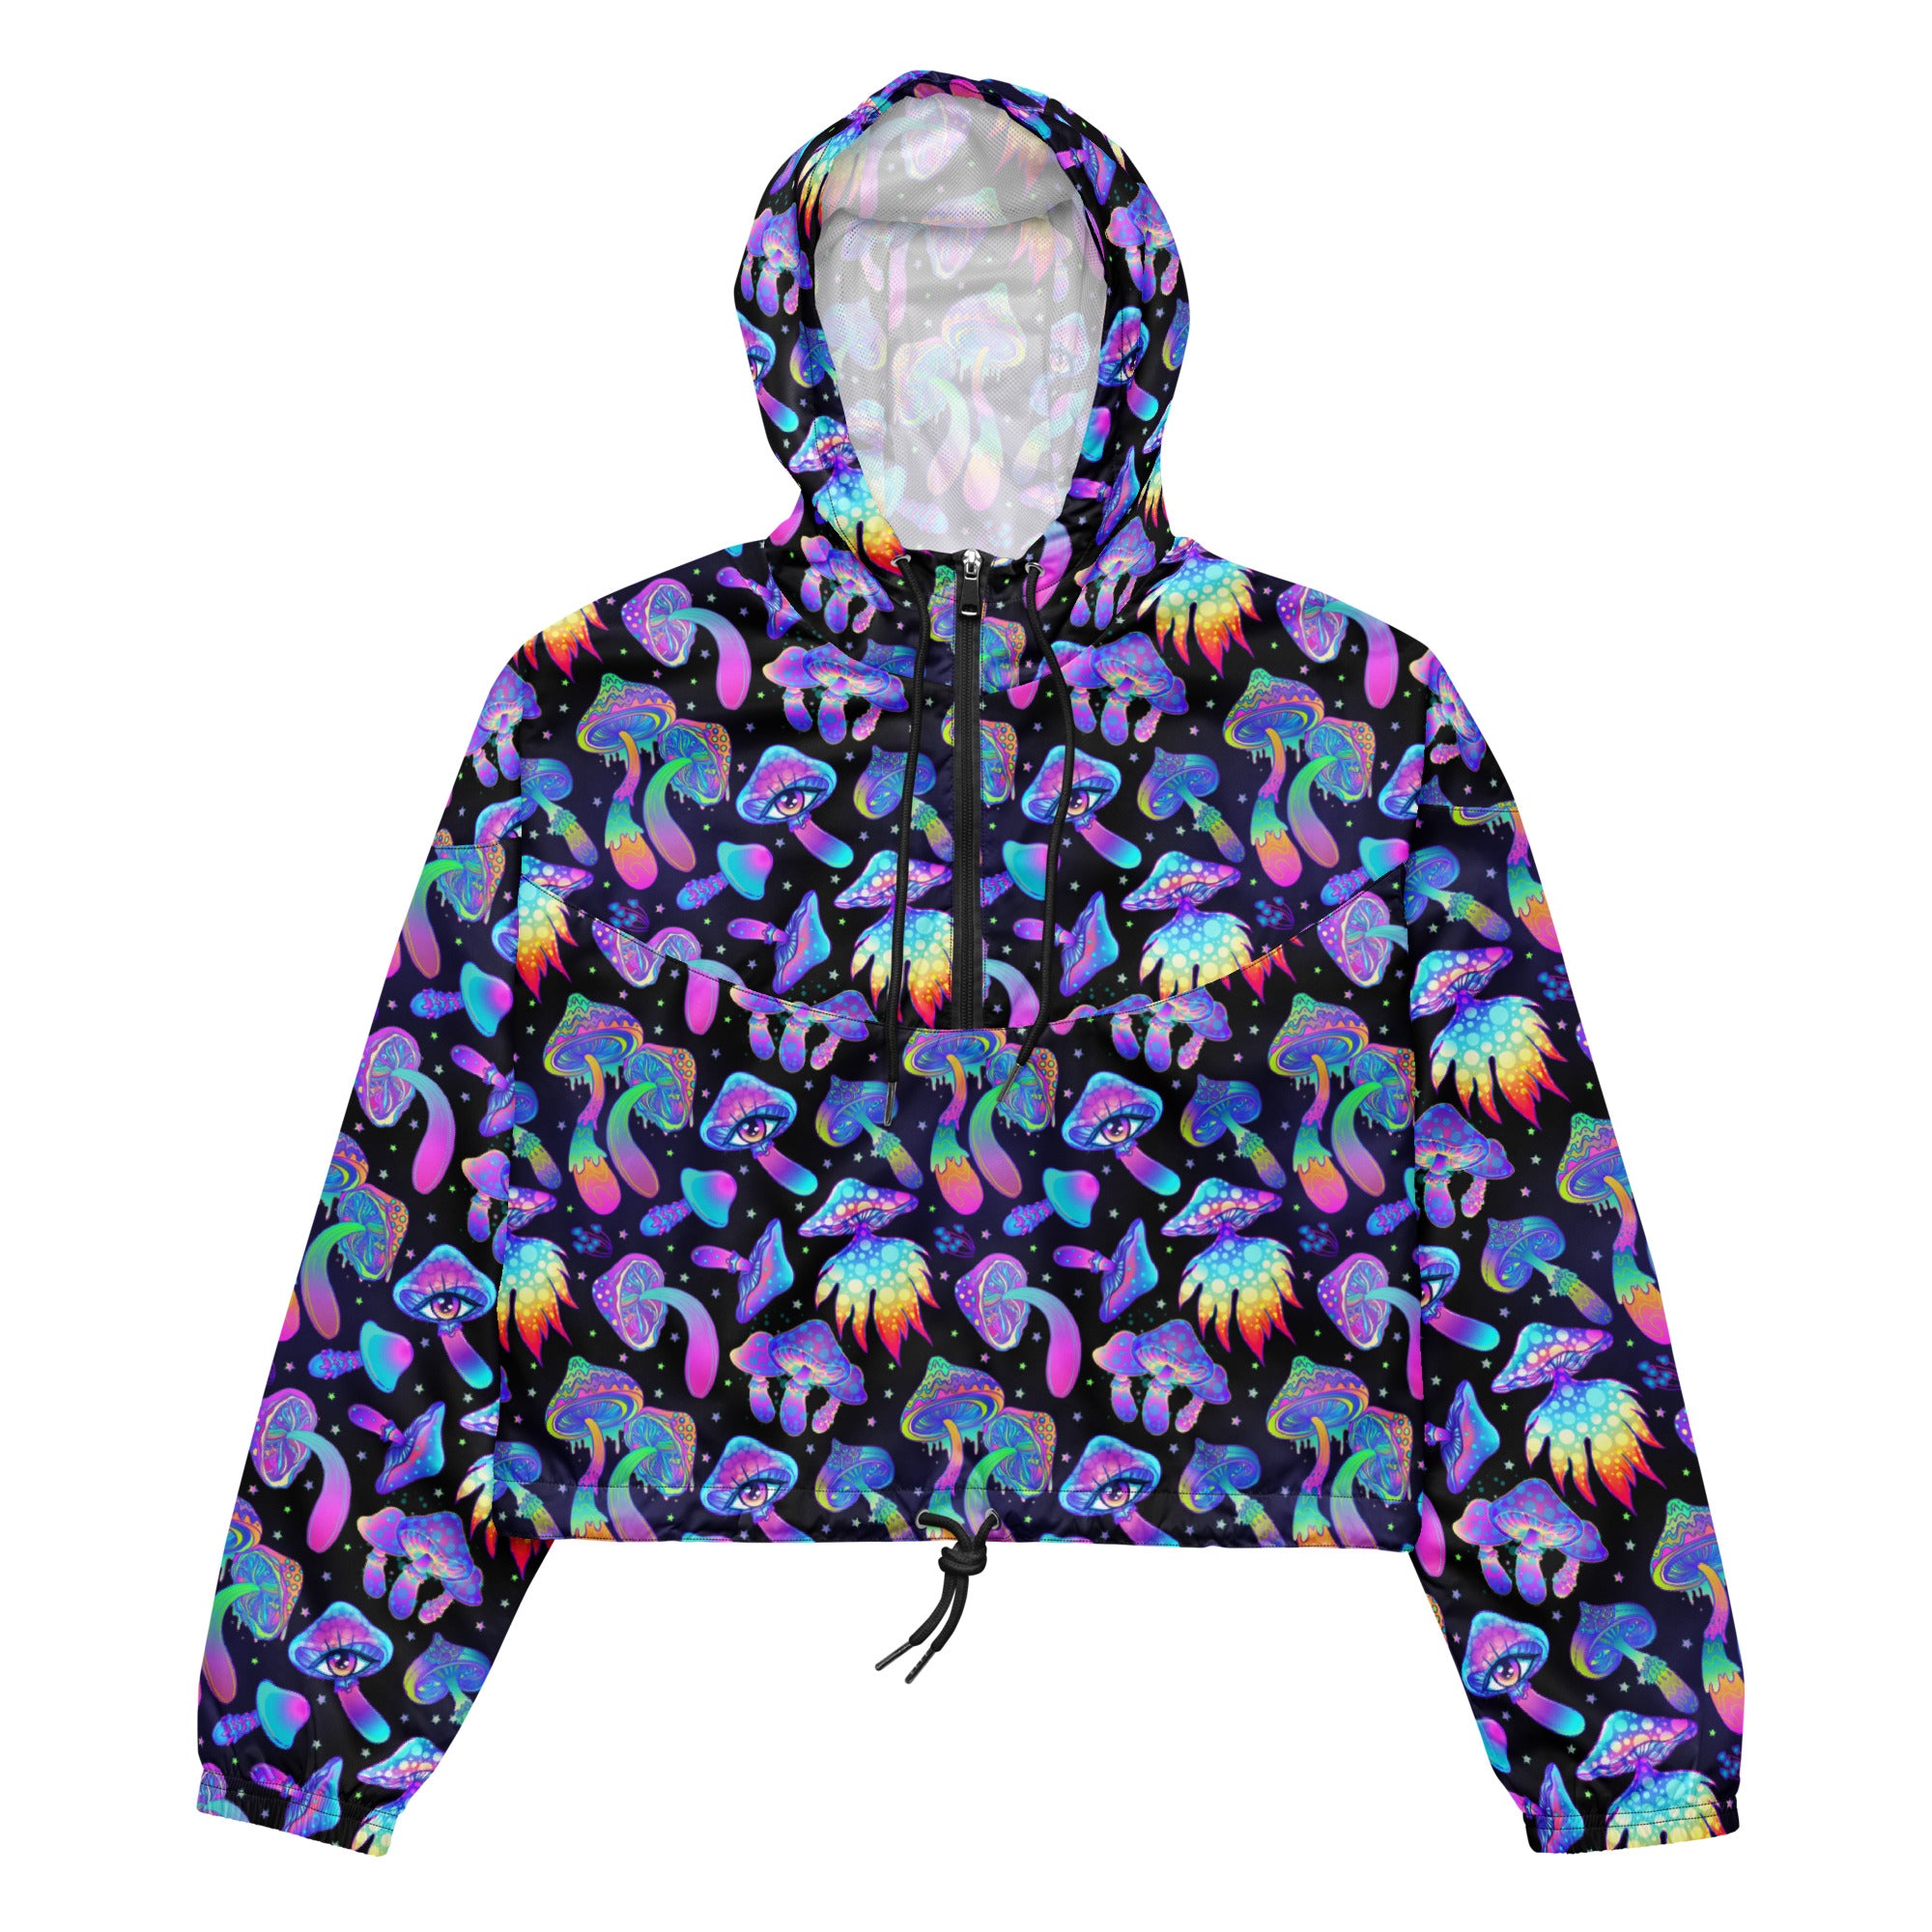 Holographic Reflective Rave Jacket, Iridescent Festival Wear Coat Clothing,  Reflective Rainbow Long Outerwear Track Cloak Rave Outfit -  Hong Kong